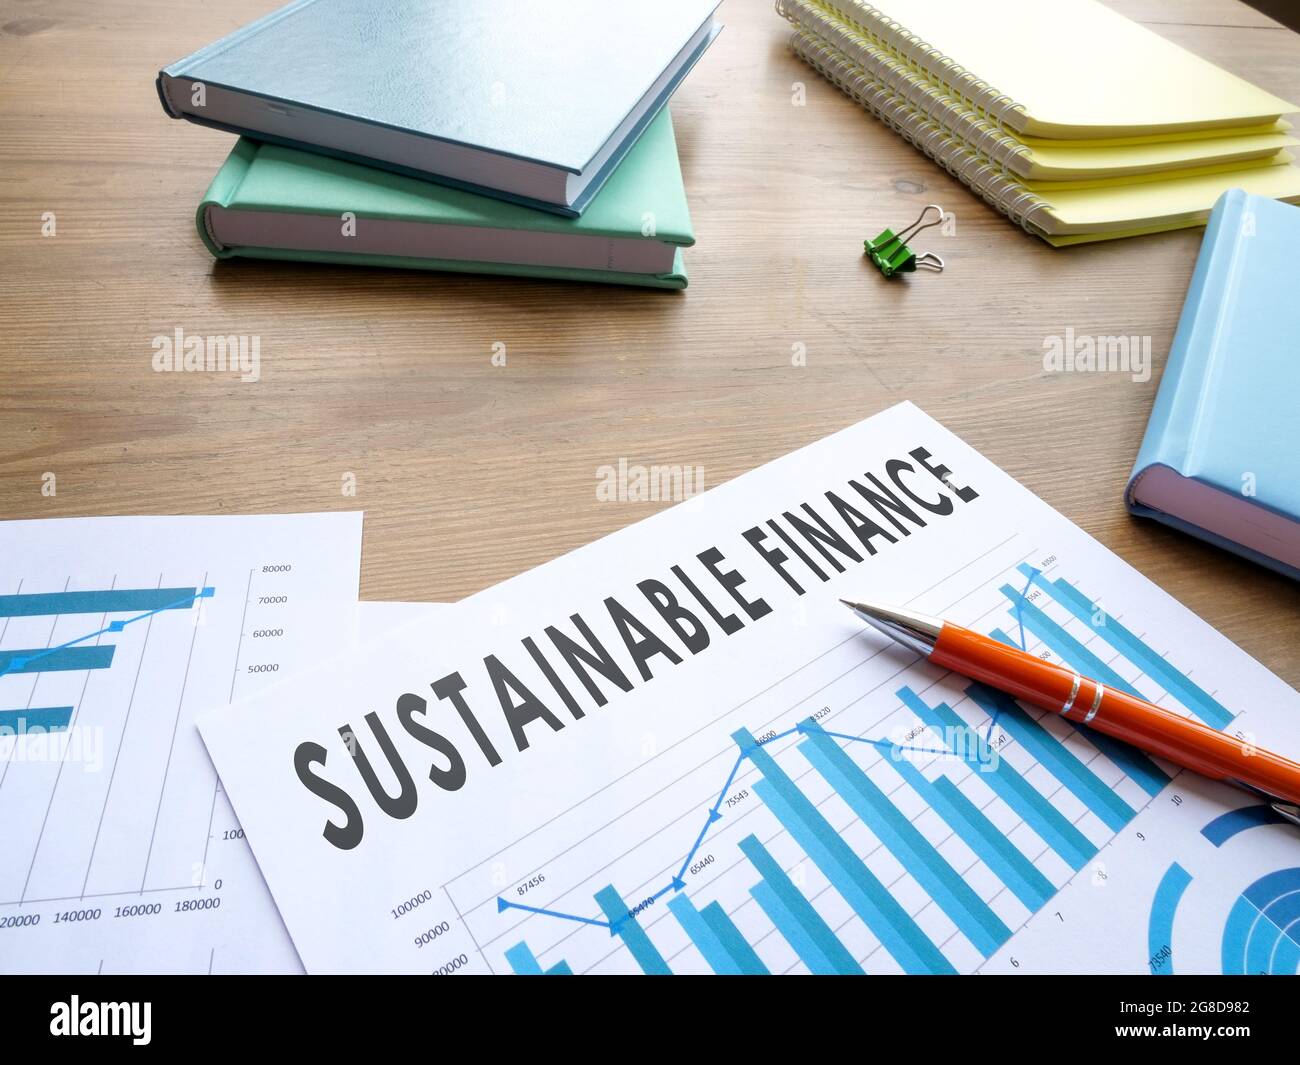 Sustainable finance words and business graphs for company strategy. Stock Photo